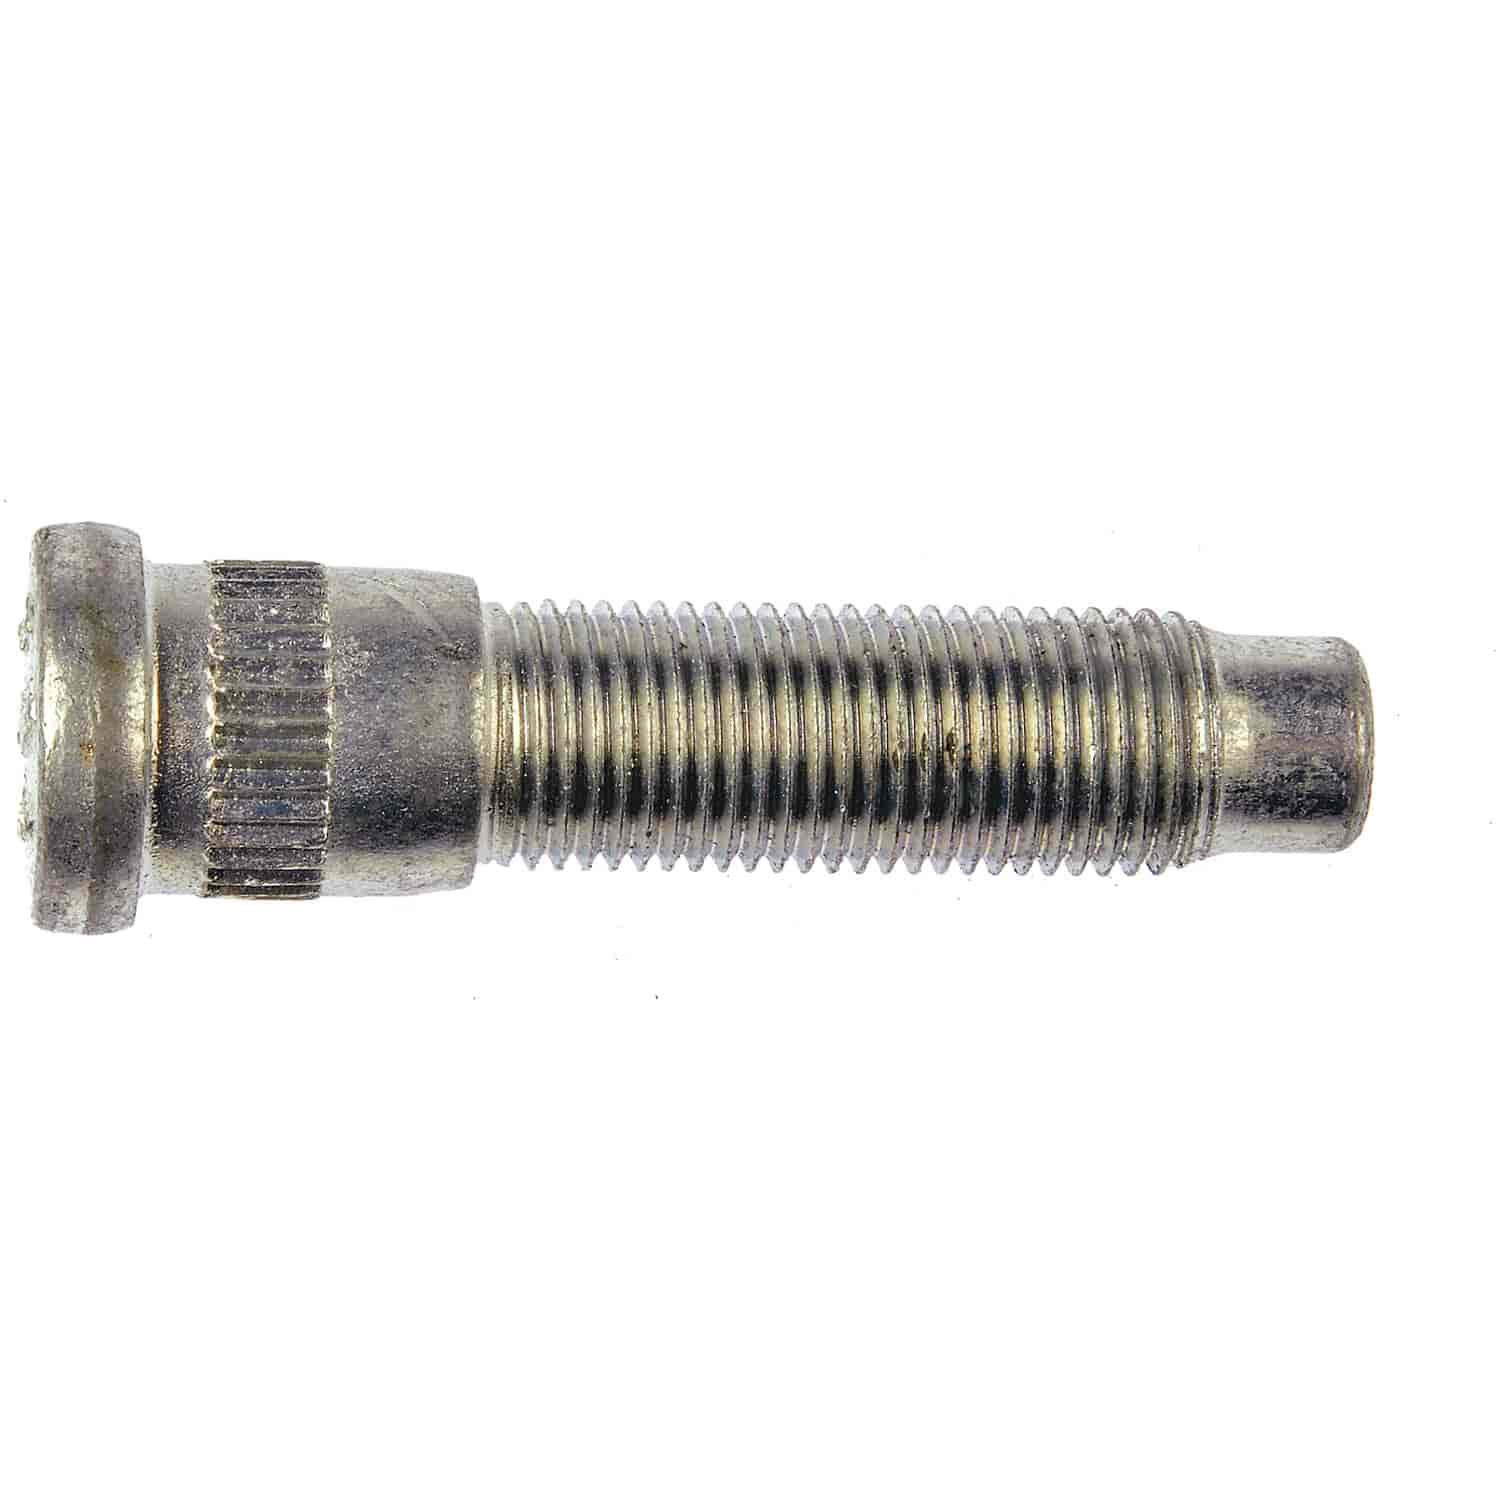 Wheel Stud for 1975-2014 Ford [1/2 in.-20 Thread]